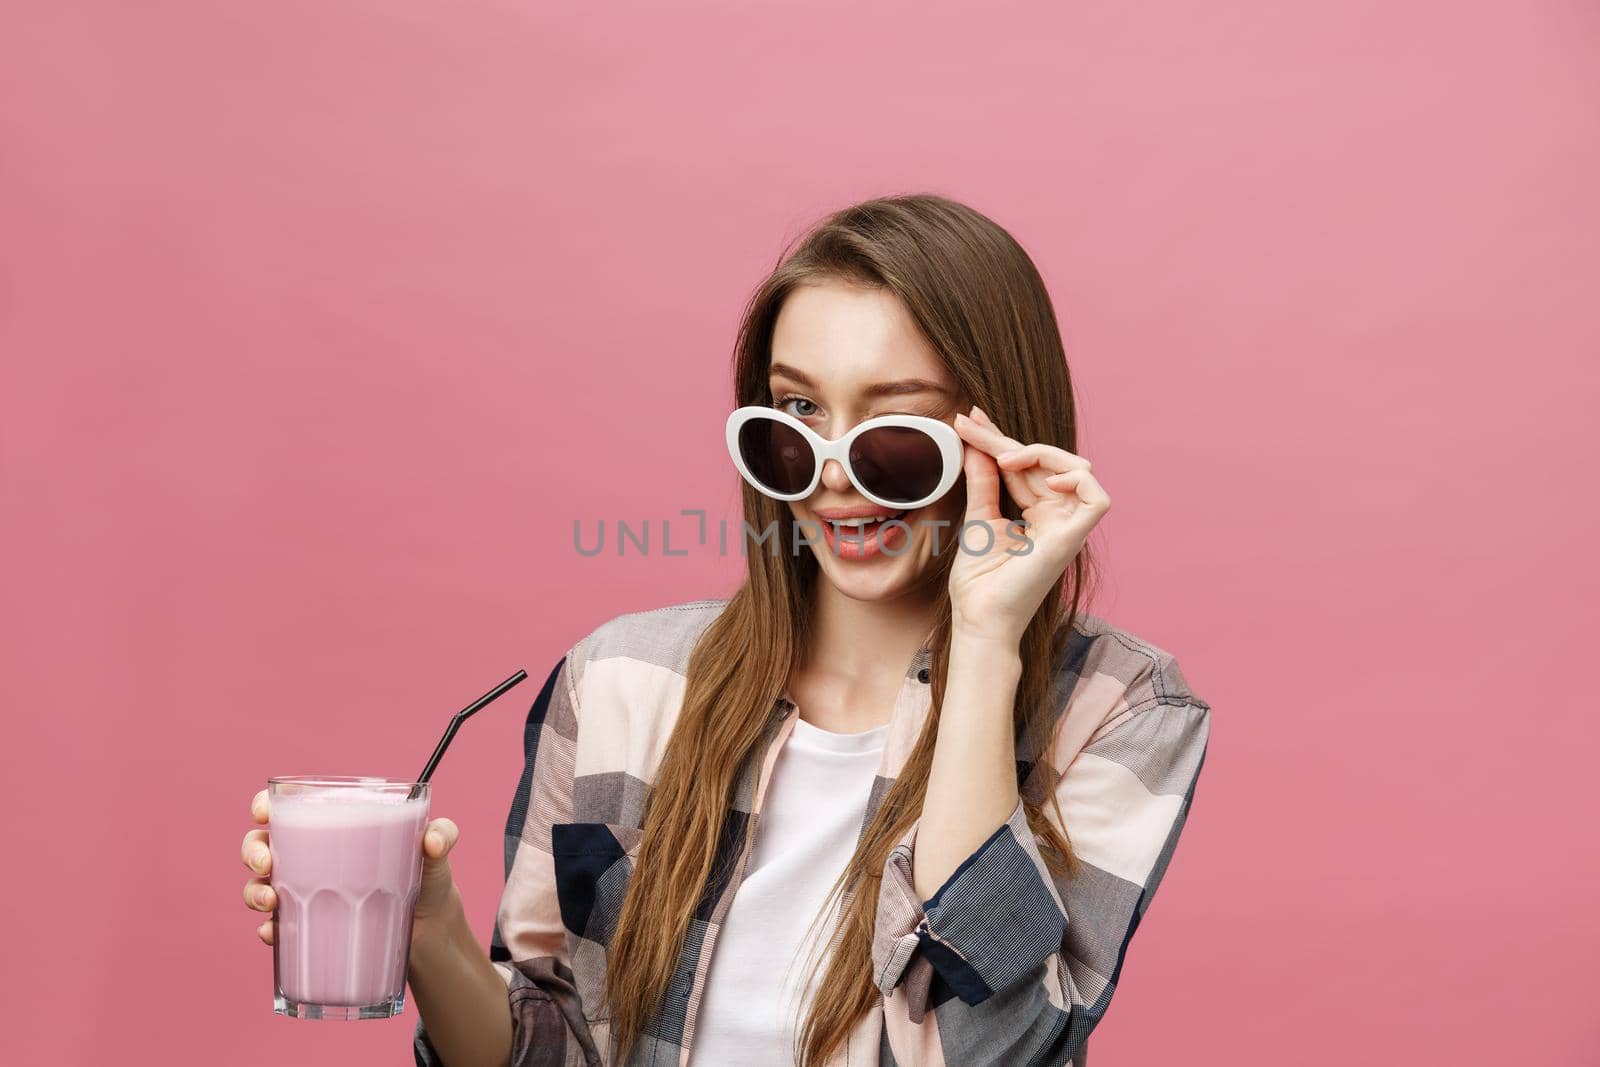 Portrait of a cute casual girl drinking orange juice from a glass and looking at camera isolated over pink background.